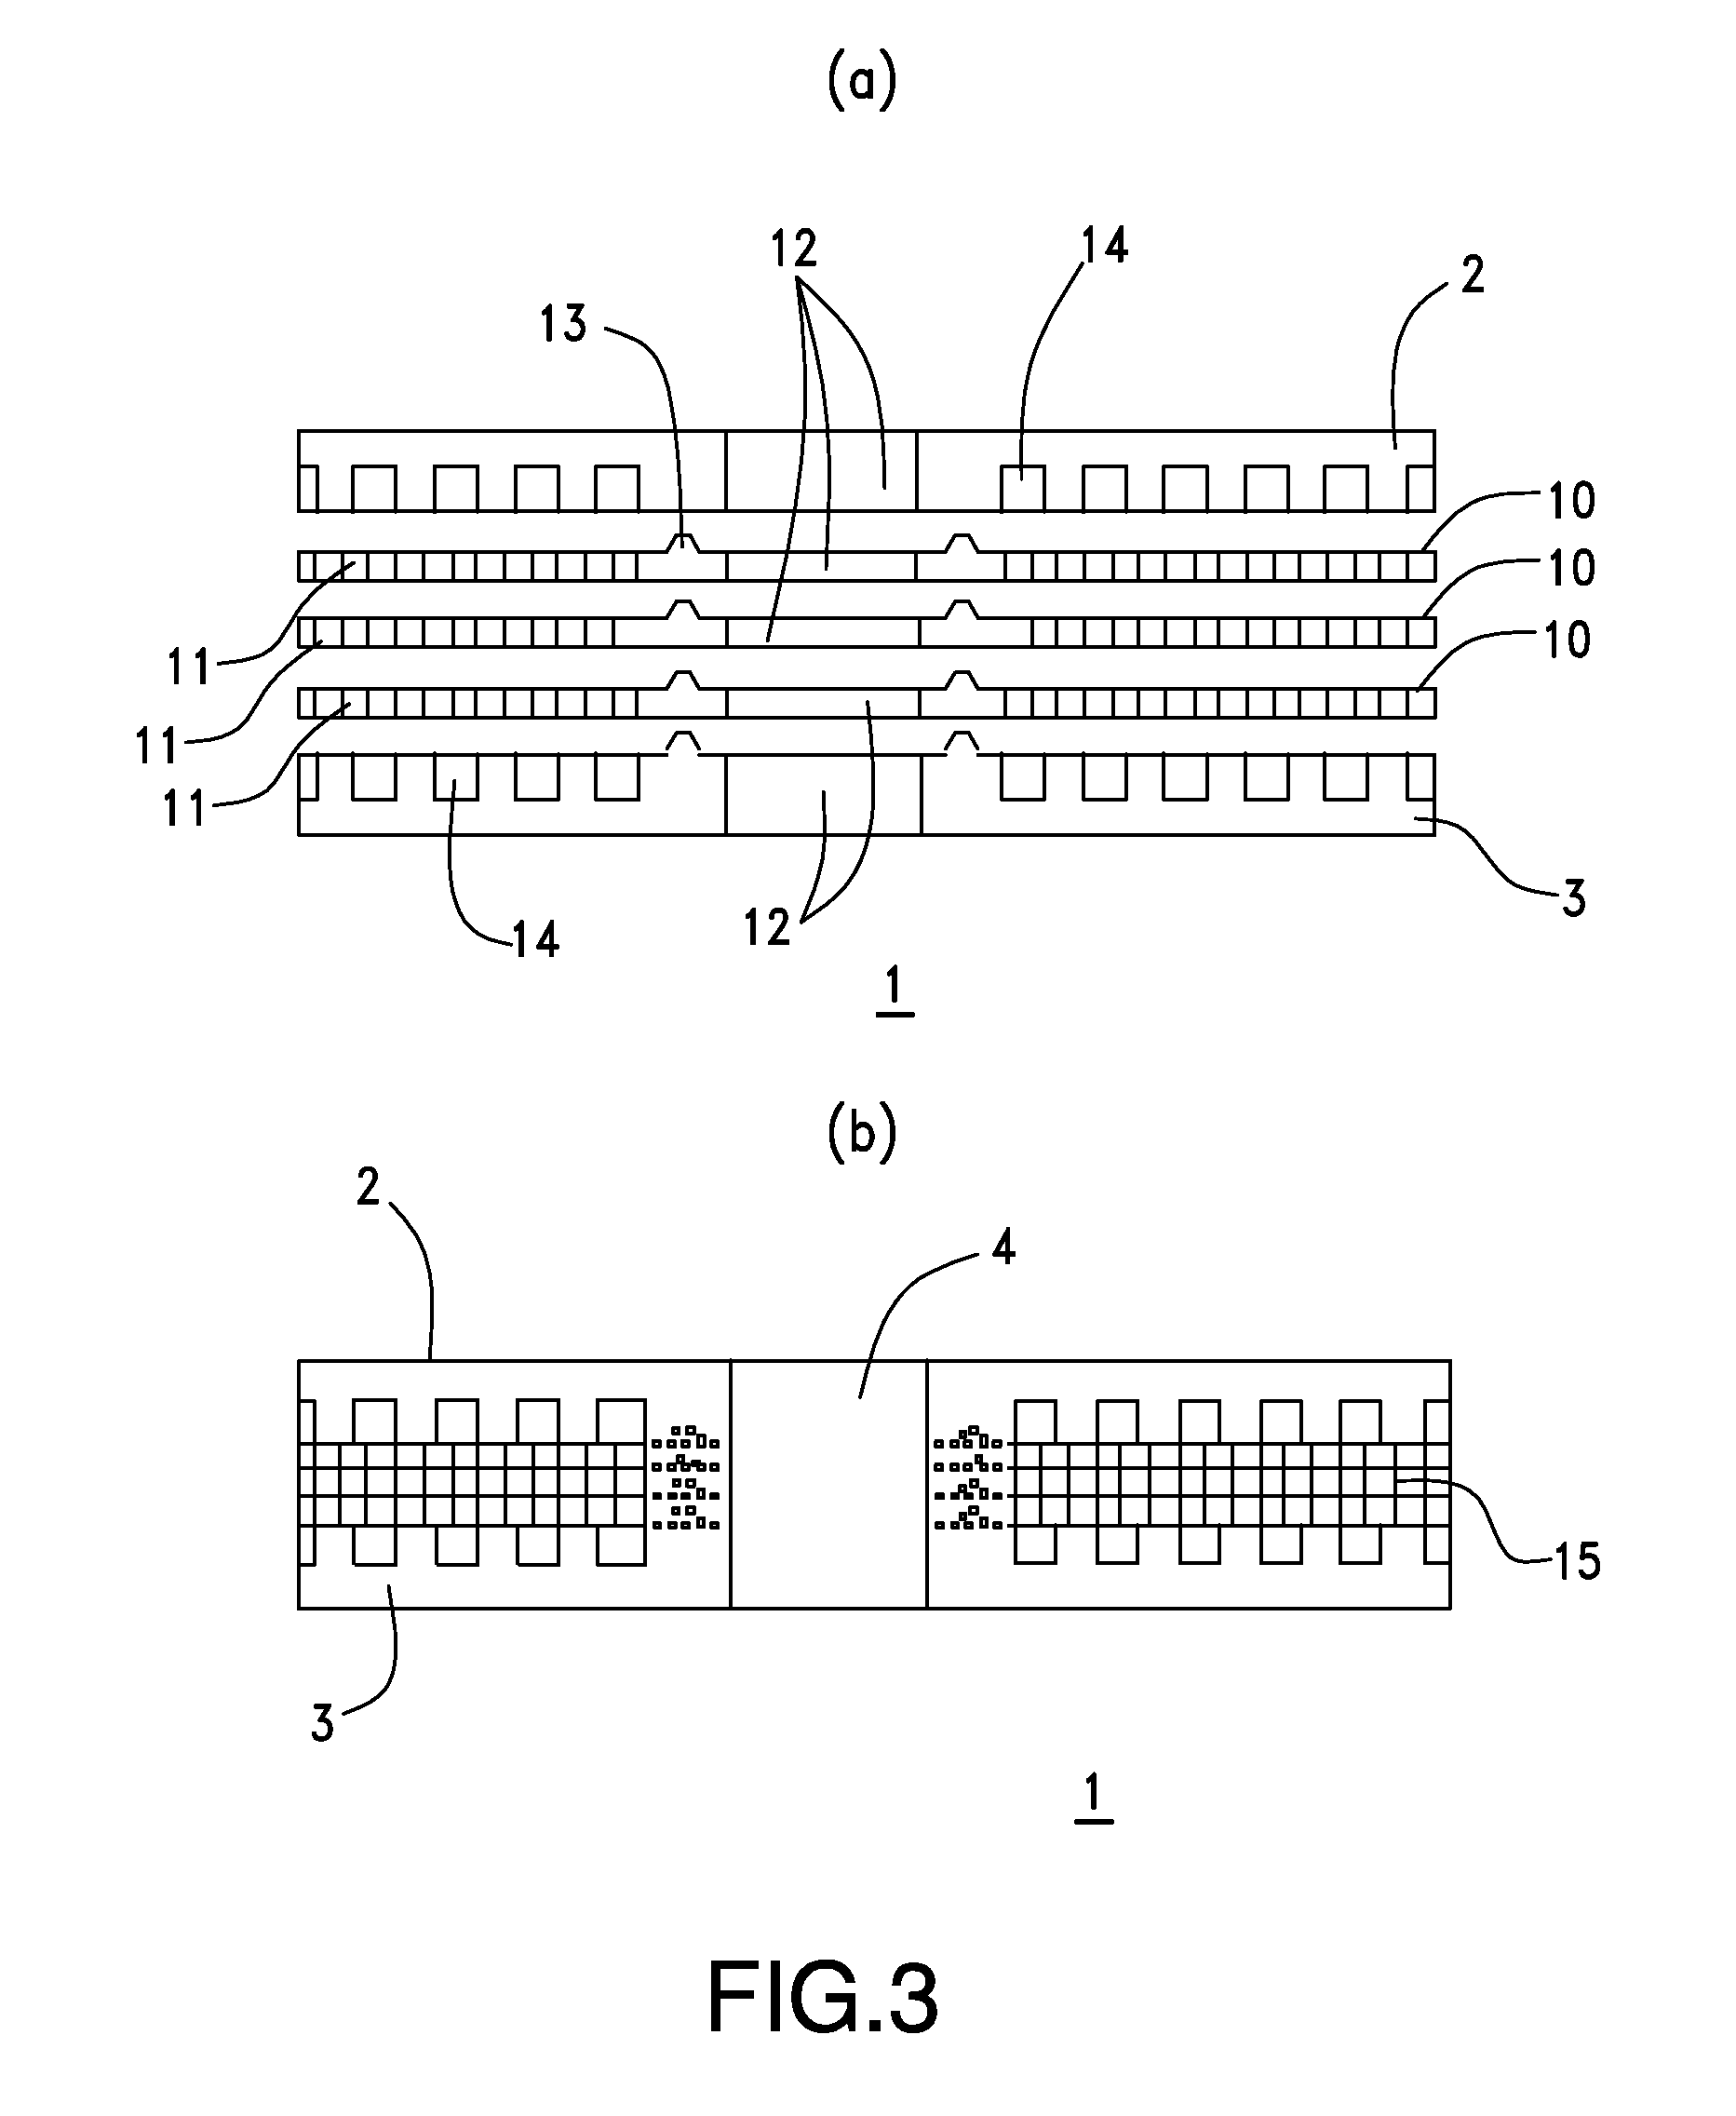 Heat Pipe, Method For Manufacturing A Heat Pipe, And A Circuit Board With A Heat Pipe Function